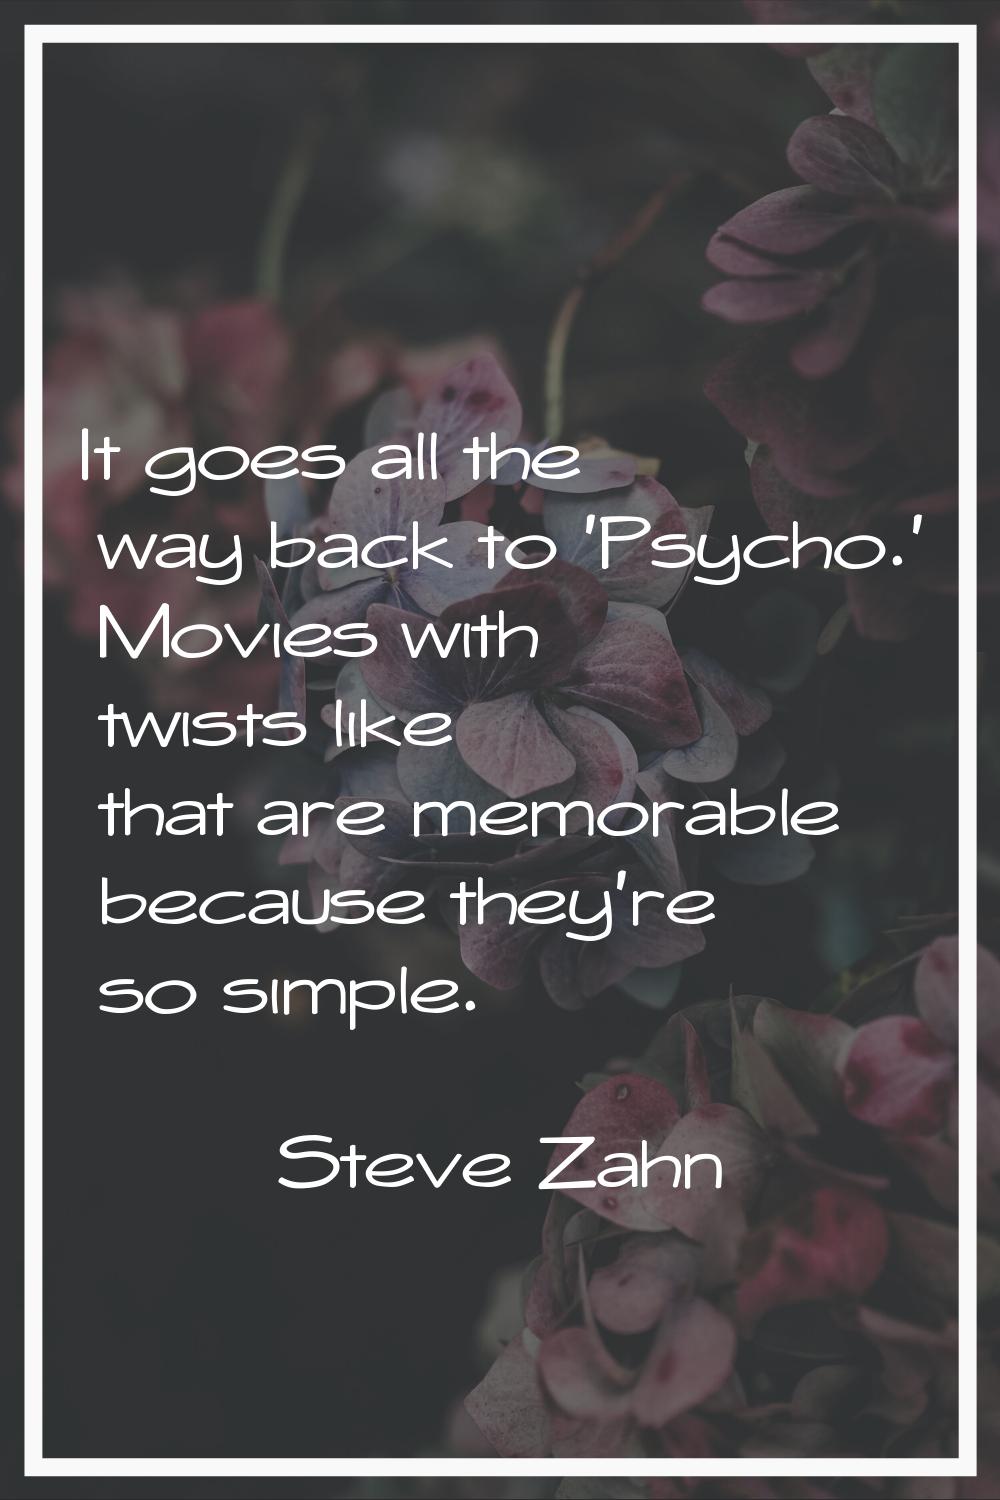 It goes all the way back to 'Psycho.' Movies with twists like that are memorable because they're so